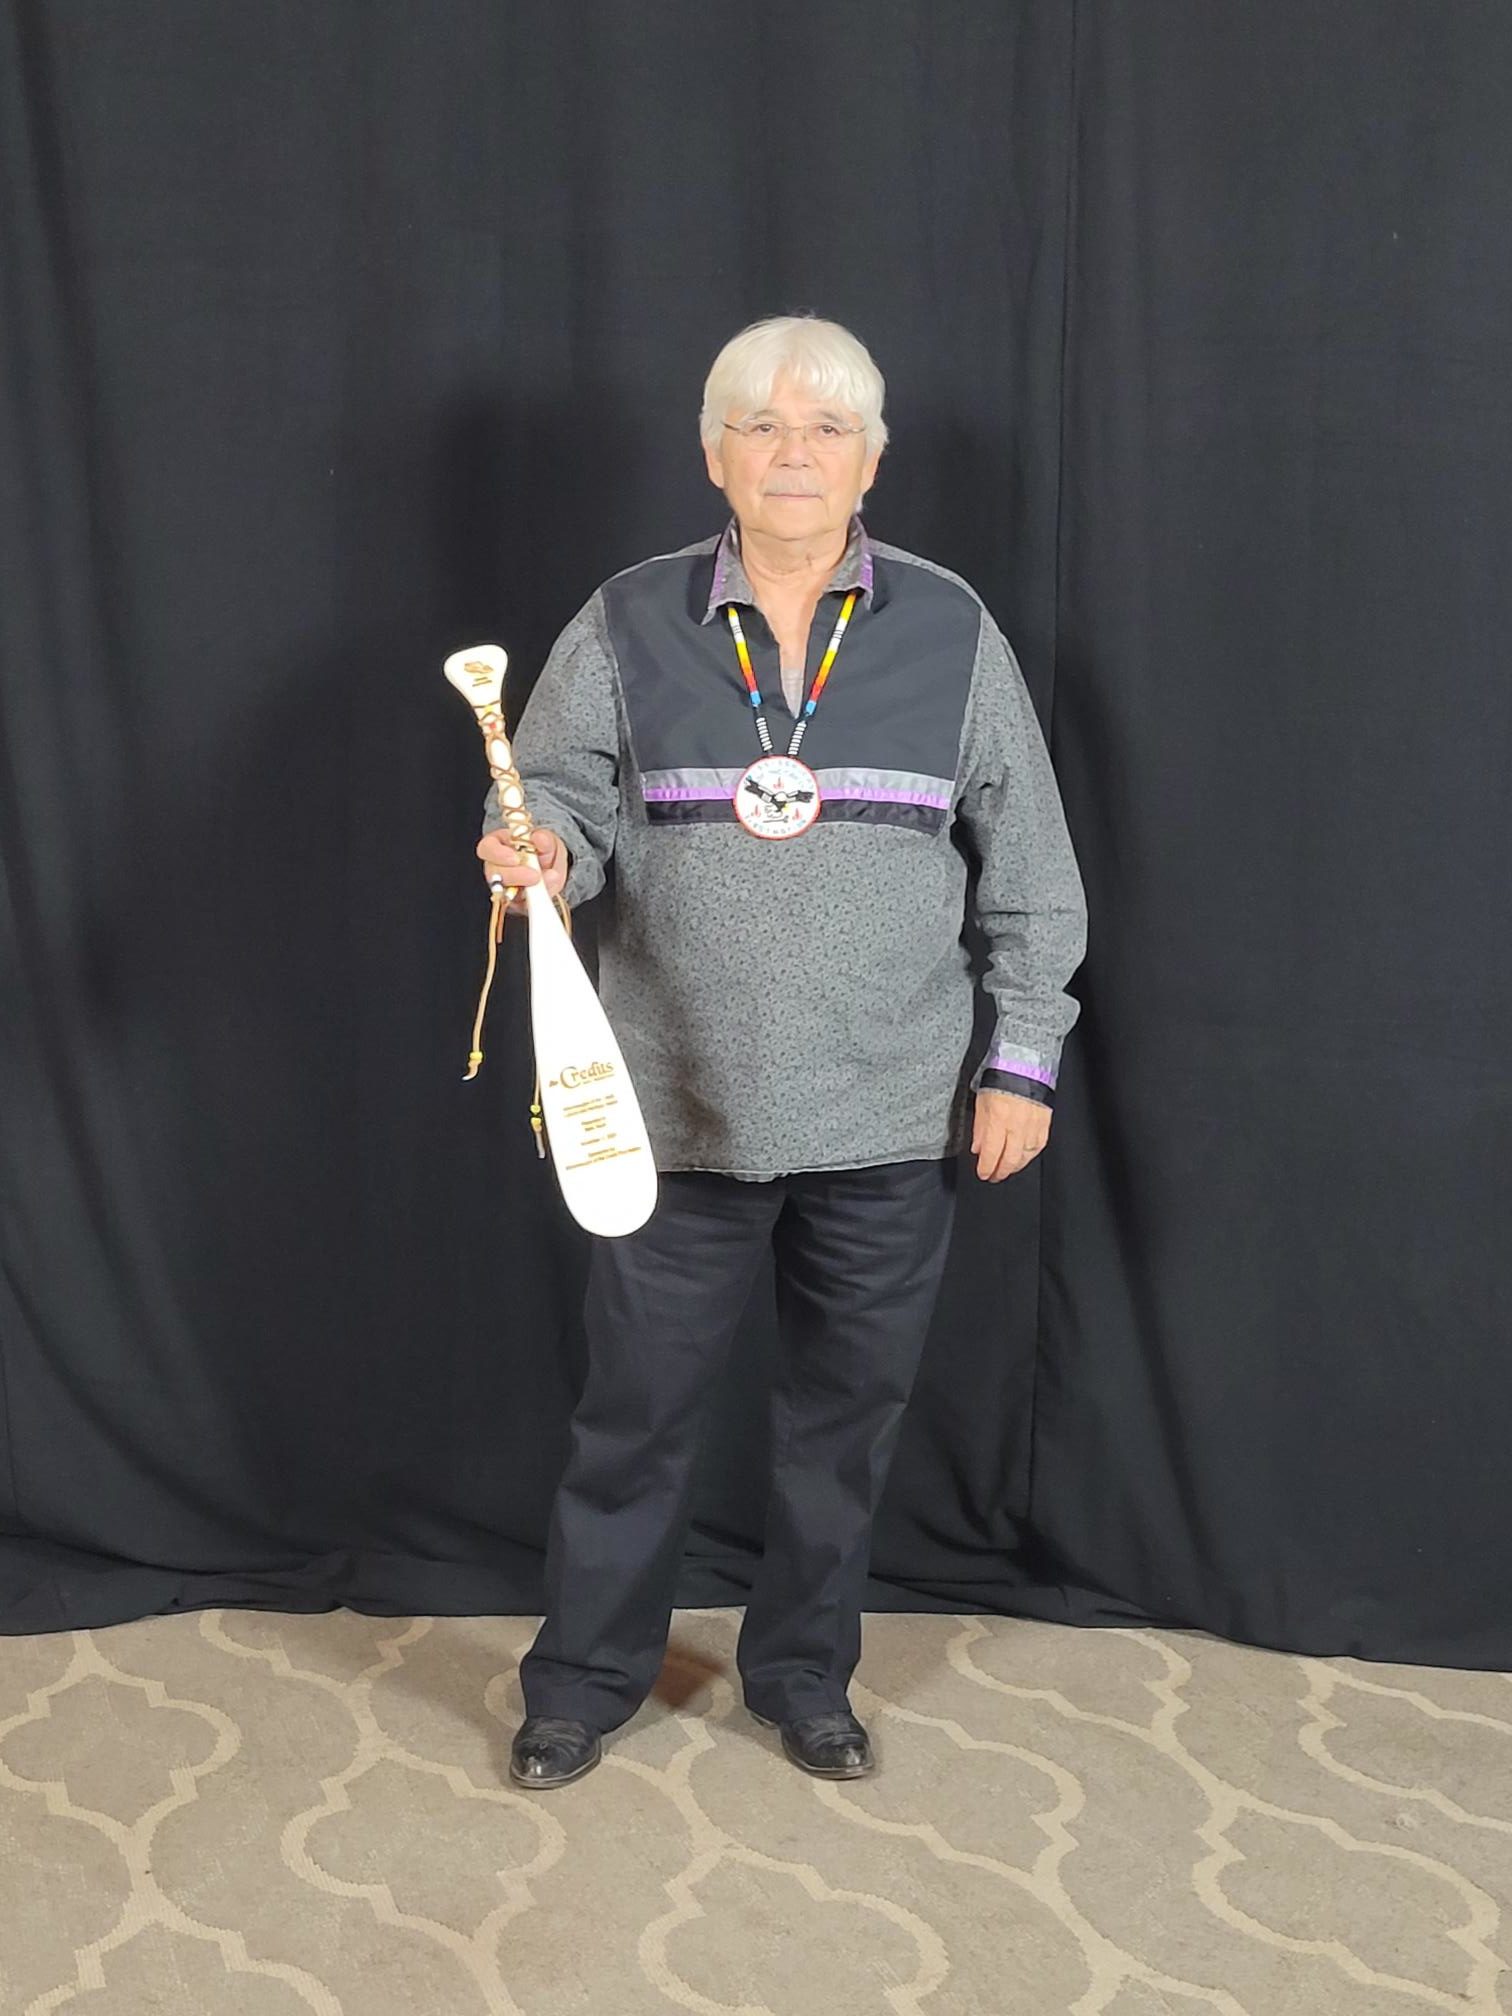 Mark Sault presented with Heritage and Cultural Award for MCFN